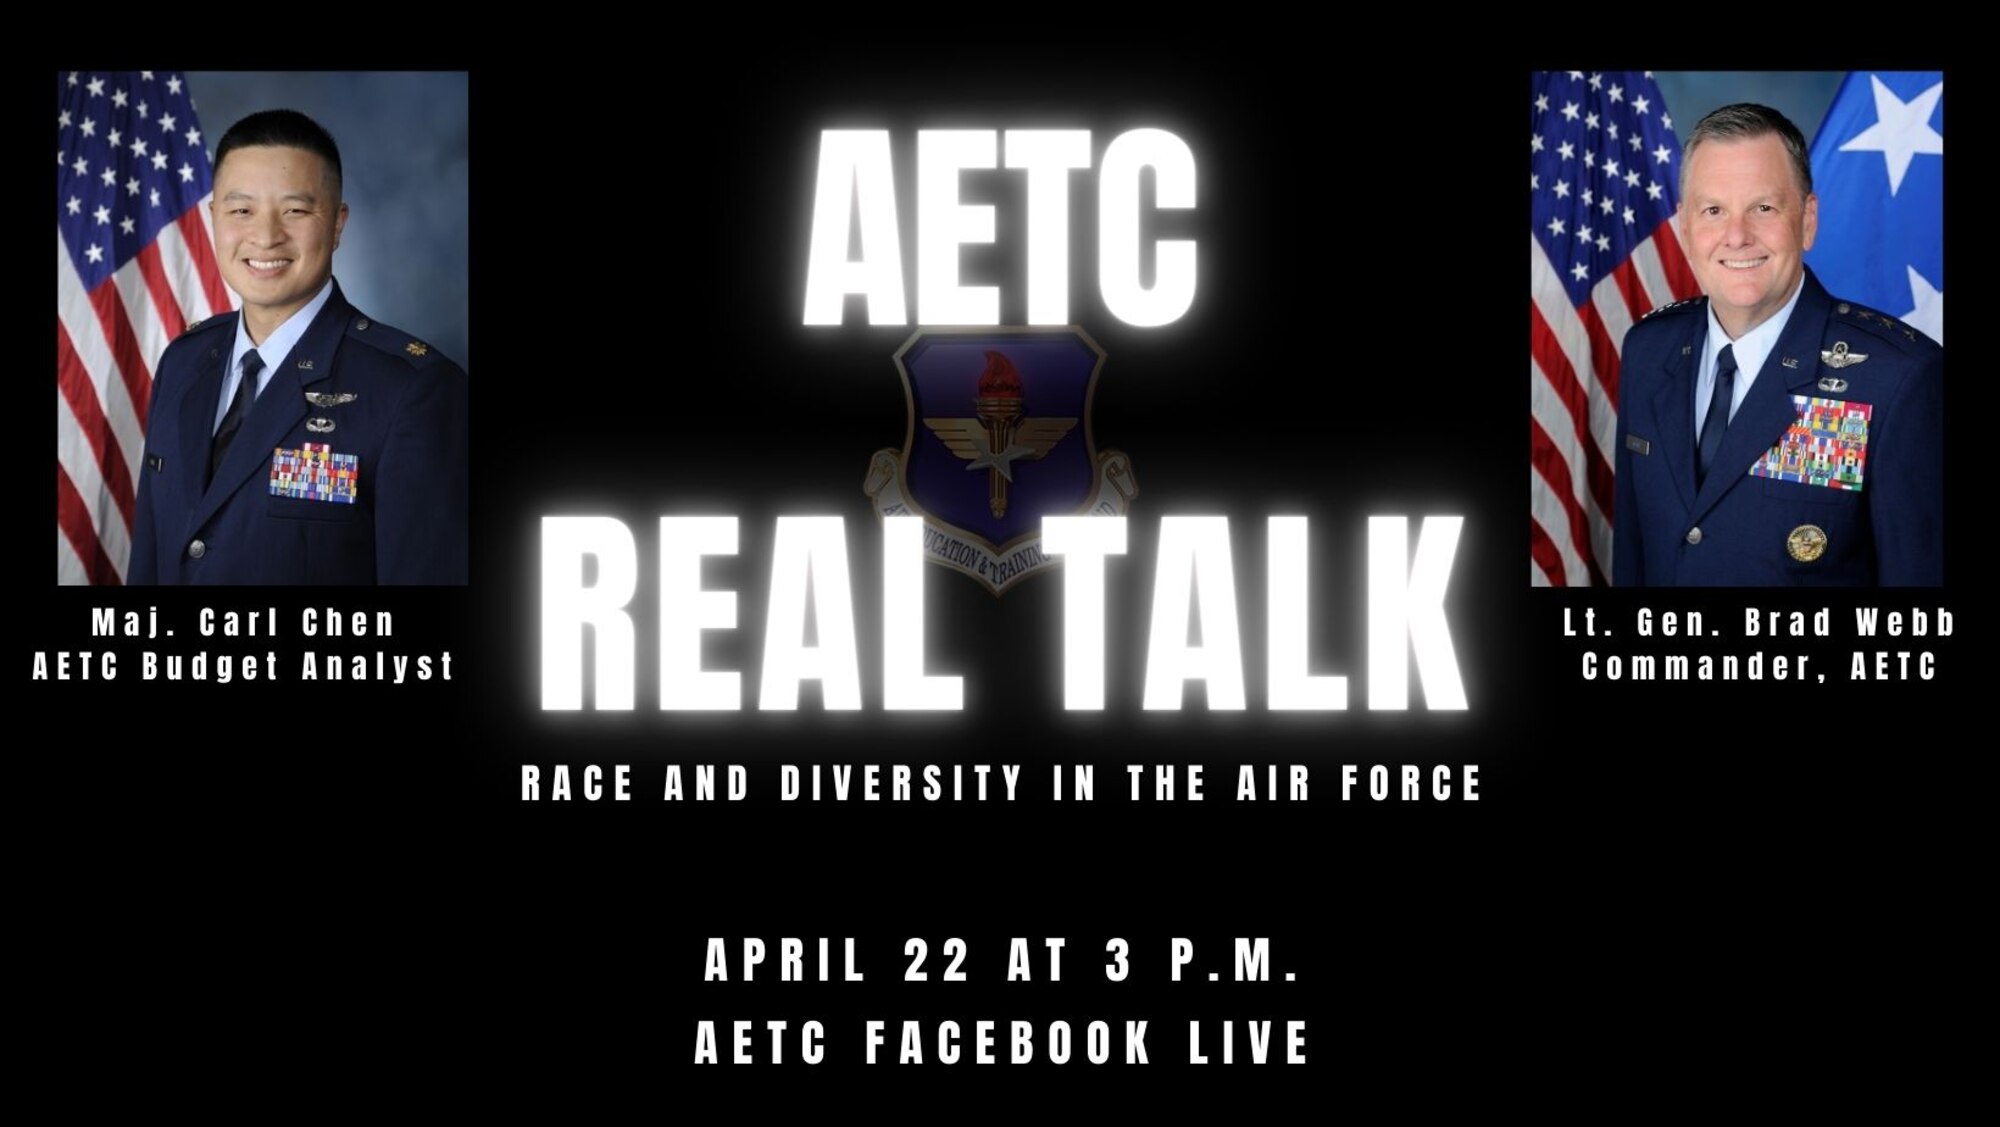 Graphic publicizing next AETC Real Talk April 22 at 3 p.m. on AETC’s Facebook page.